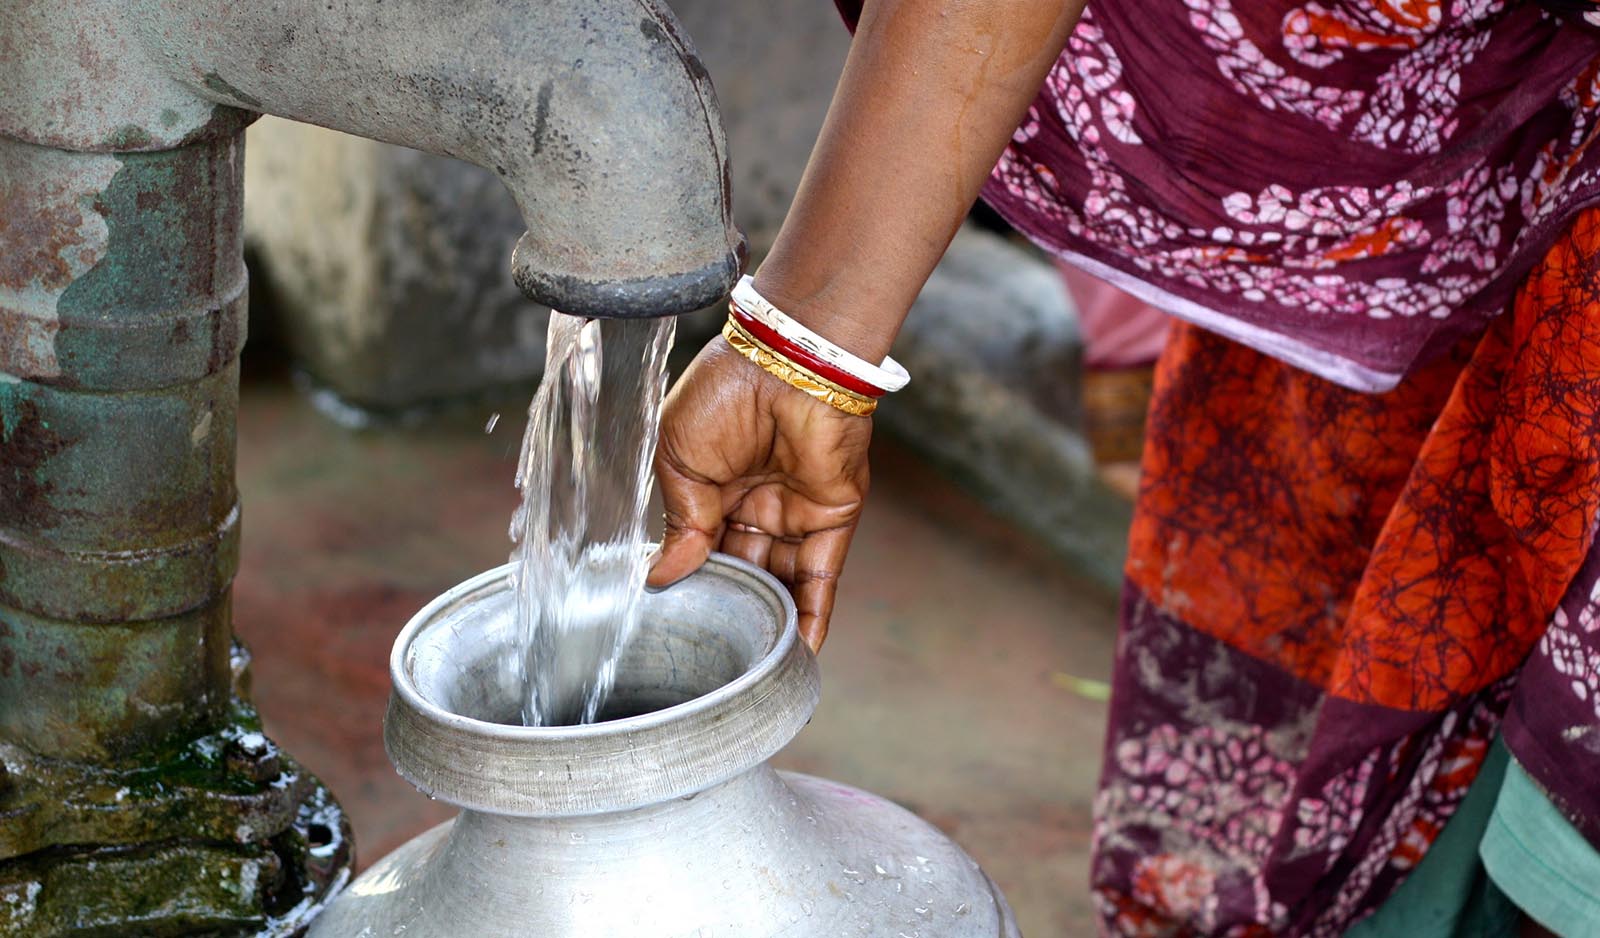 How can we improve access to clean drinking water and sanitation around the world?